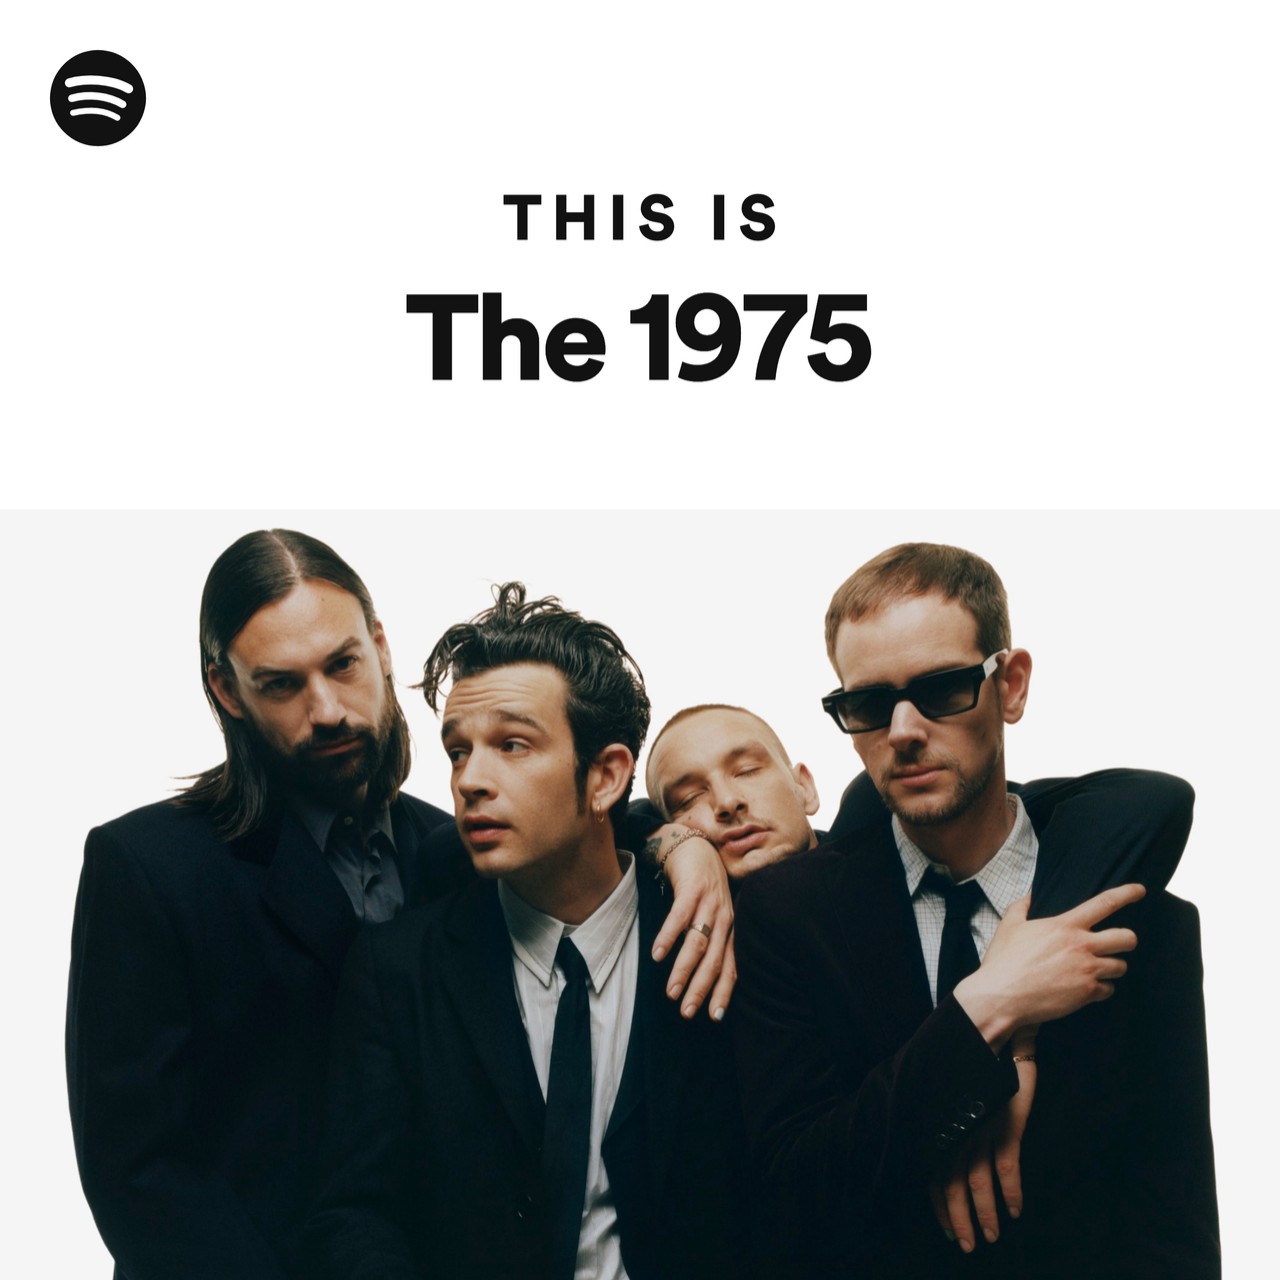 This Is The 1975 | Spotify Playlist